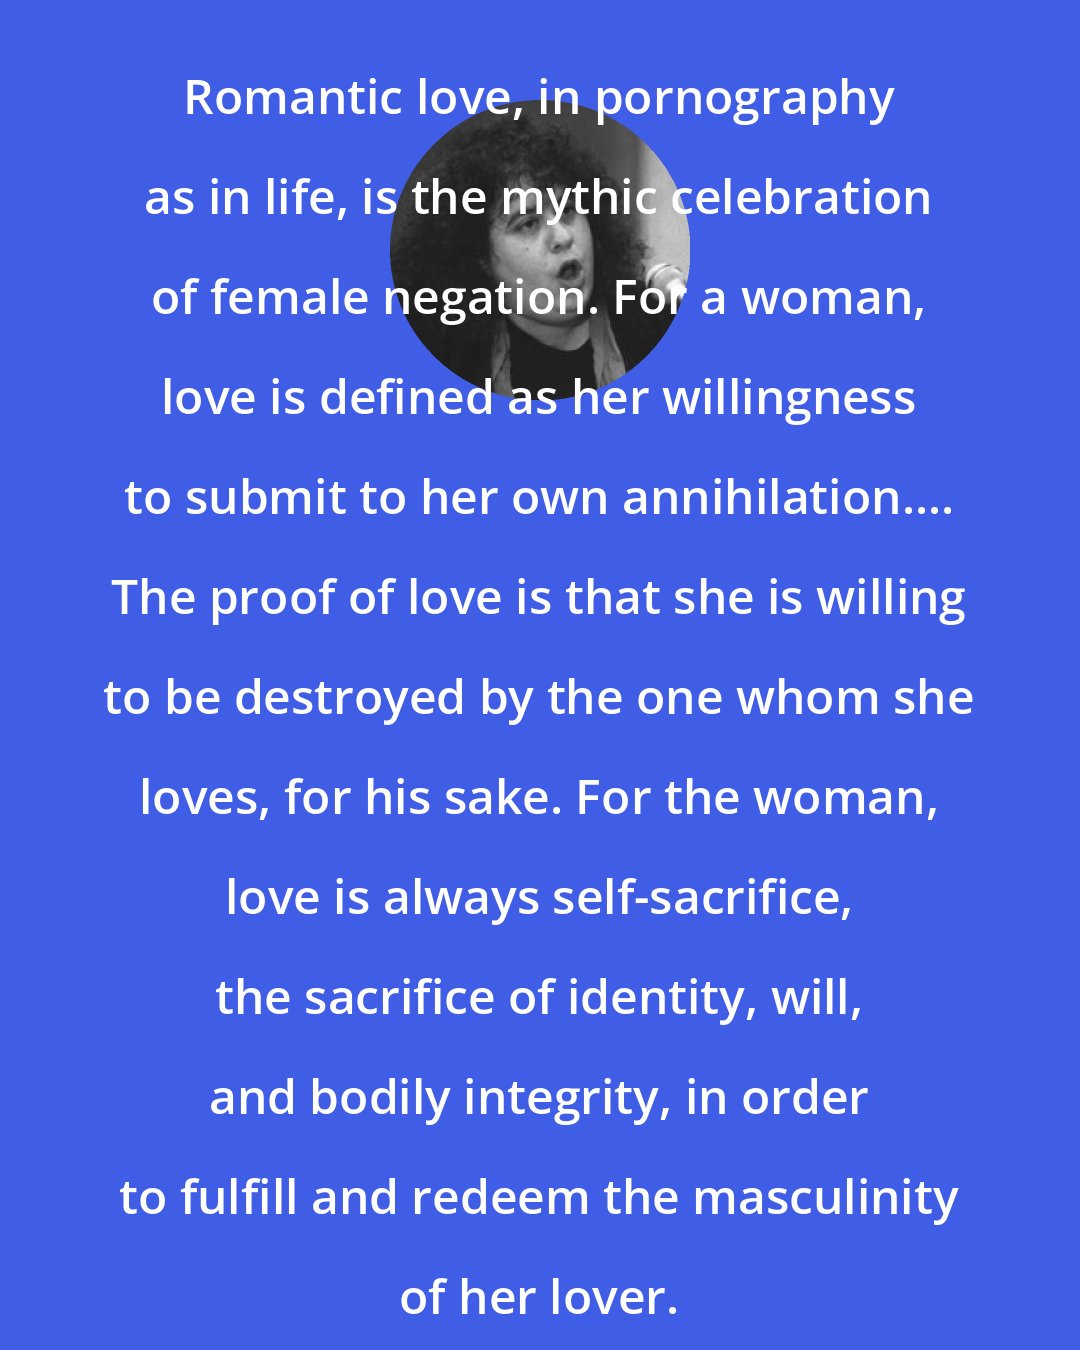 Andrea Dworkin: Romantic love, in pornography as in life, is the mythic celebration of female negation. For a woman, love is defined as her willingness to submit to her own annihilation.... The proof of love is that she is willing to be destroyed by the one whom she loves, for his sake. For the woman, love is always self-sacrifice, the sacrifice of identity, will, and bodily integrity, in order to fulfill and redeem the masculinity of her lover.